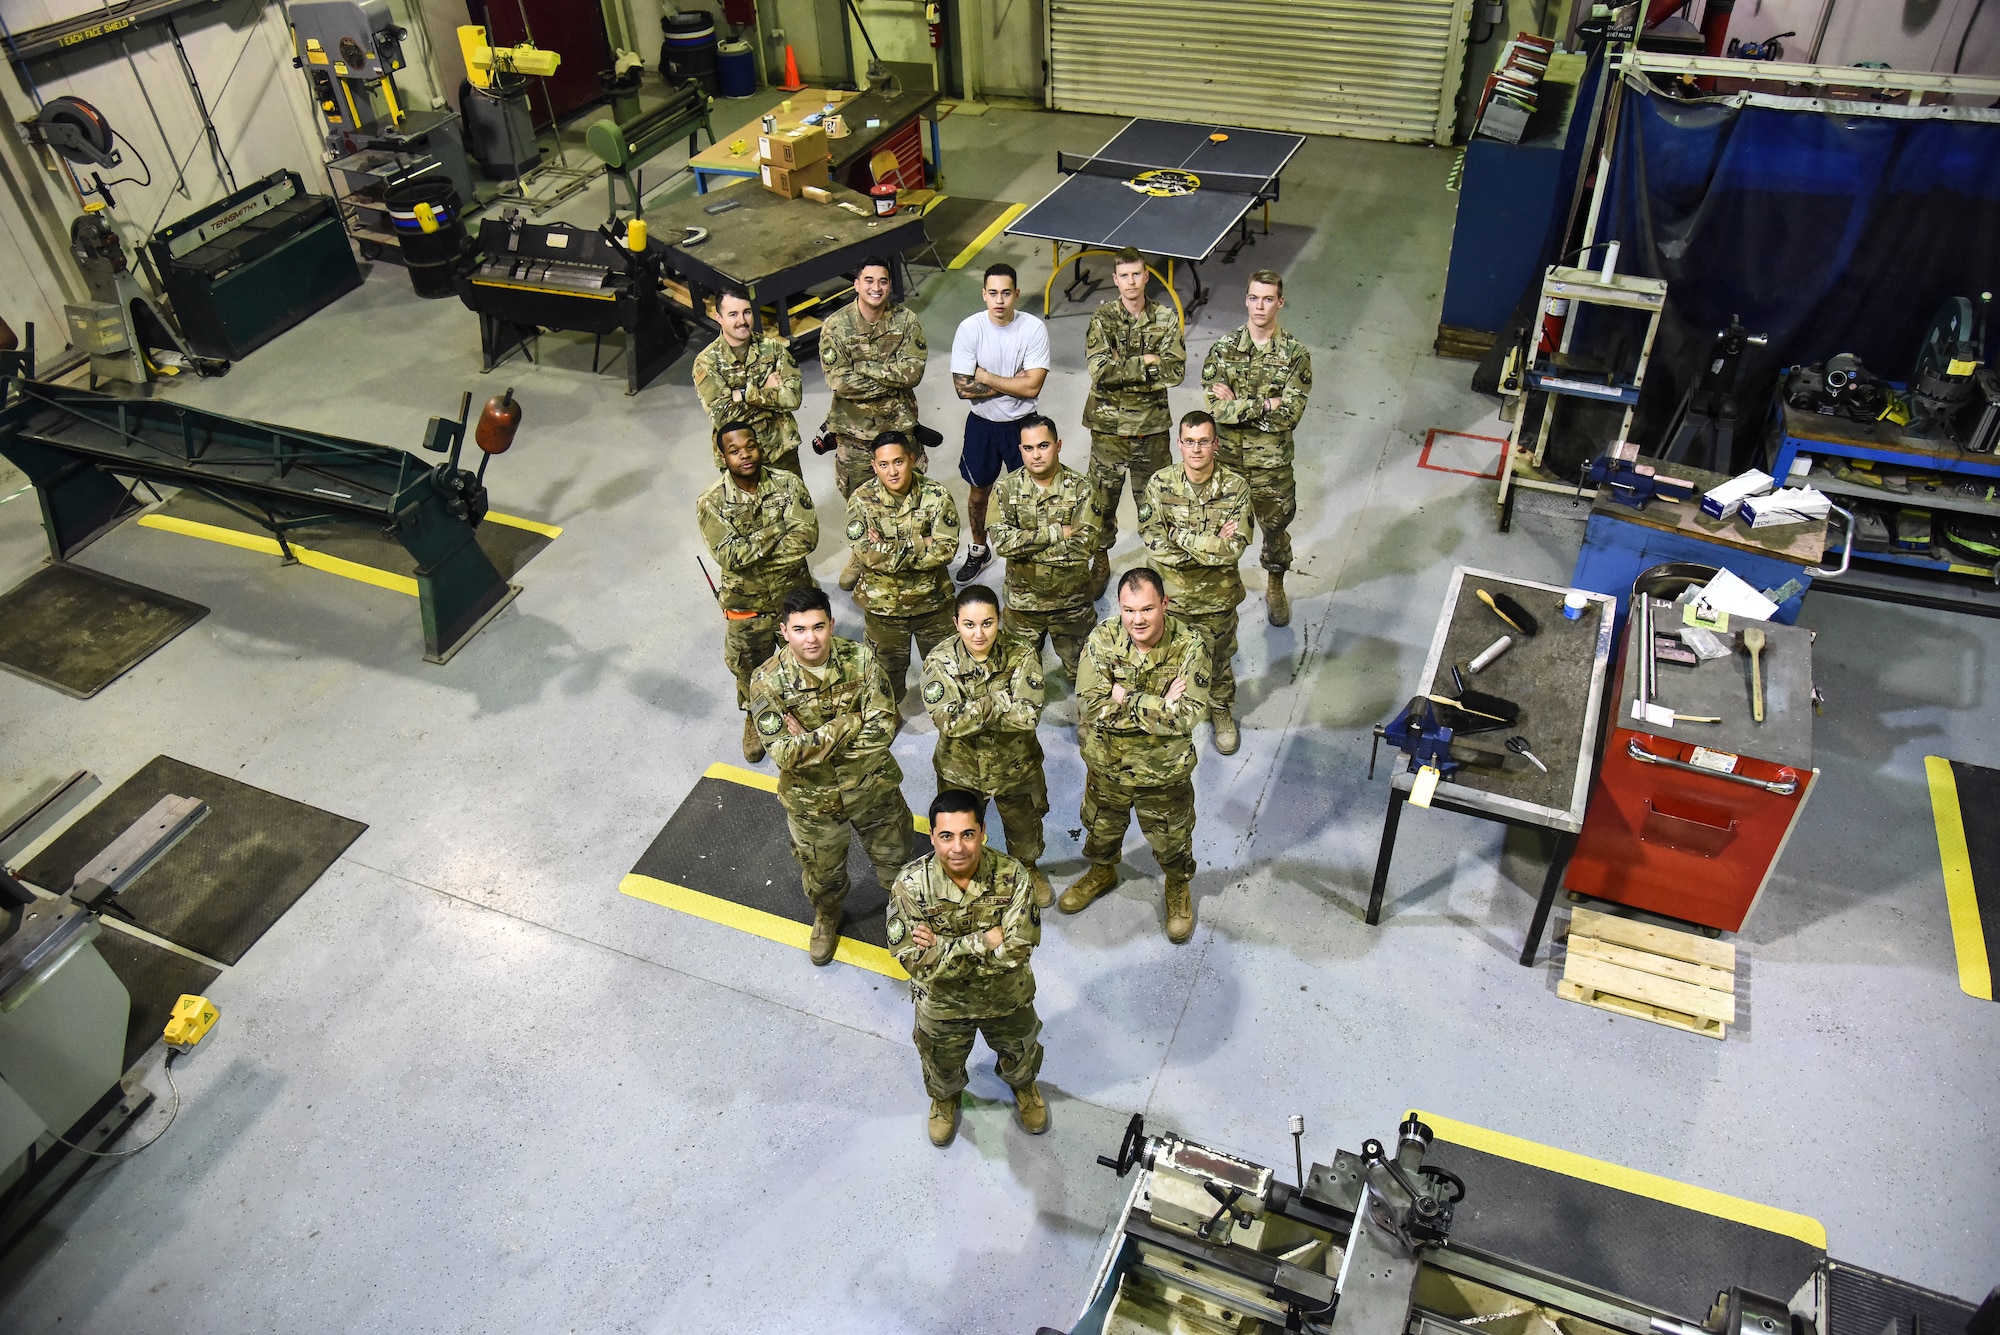 The 380th Expeditionary Maintenance Squadron fabrication flight poses for a group photo at Al Dhafra Air Base, United Arab Emirates, Dec. 10, 2018. The fabrication flight, also known as “Fab Flight” or the “American chopper of aircraft maintenance” is comprised of Sheet Metals, Non-Destructive Inspection and Aircraft Structural Repair technicians. (U.S. Air Force photo by Senior Airman Mya M. Crosby)